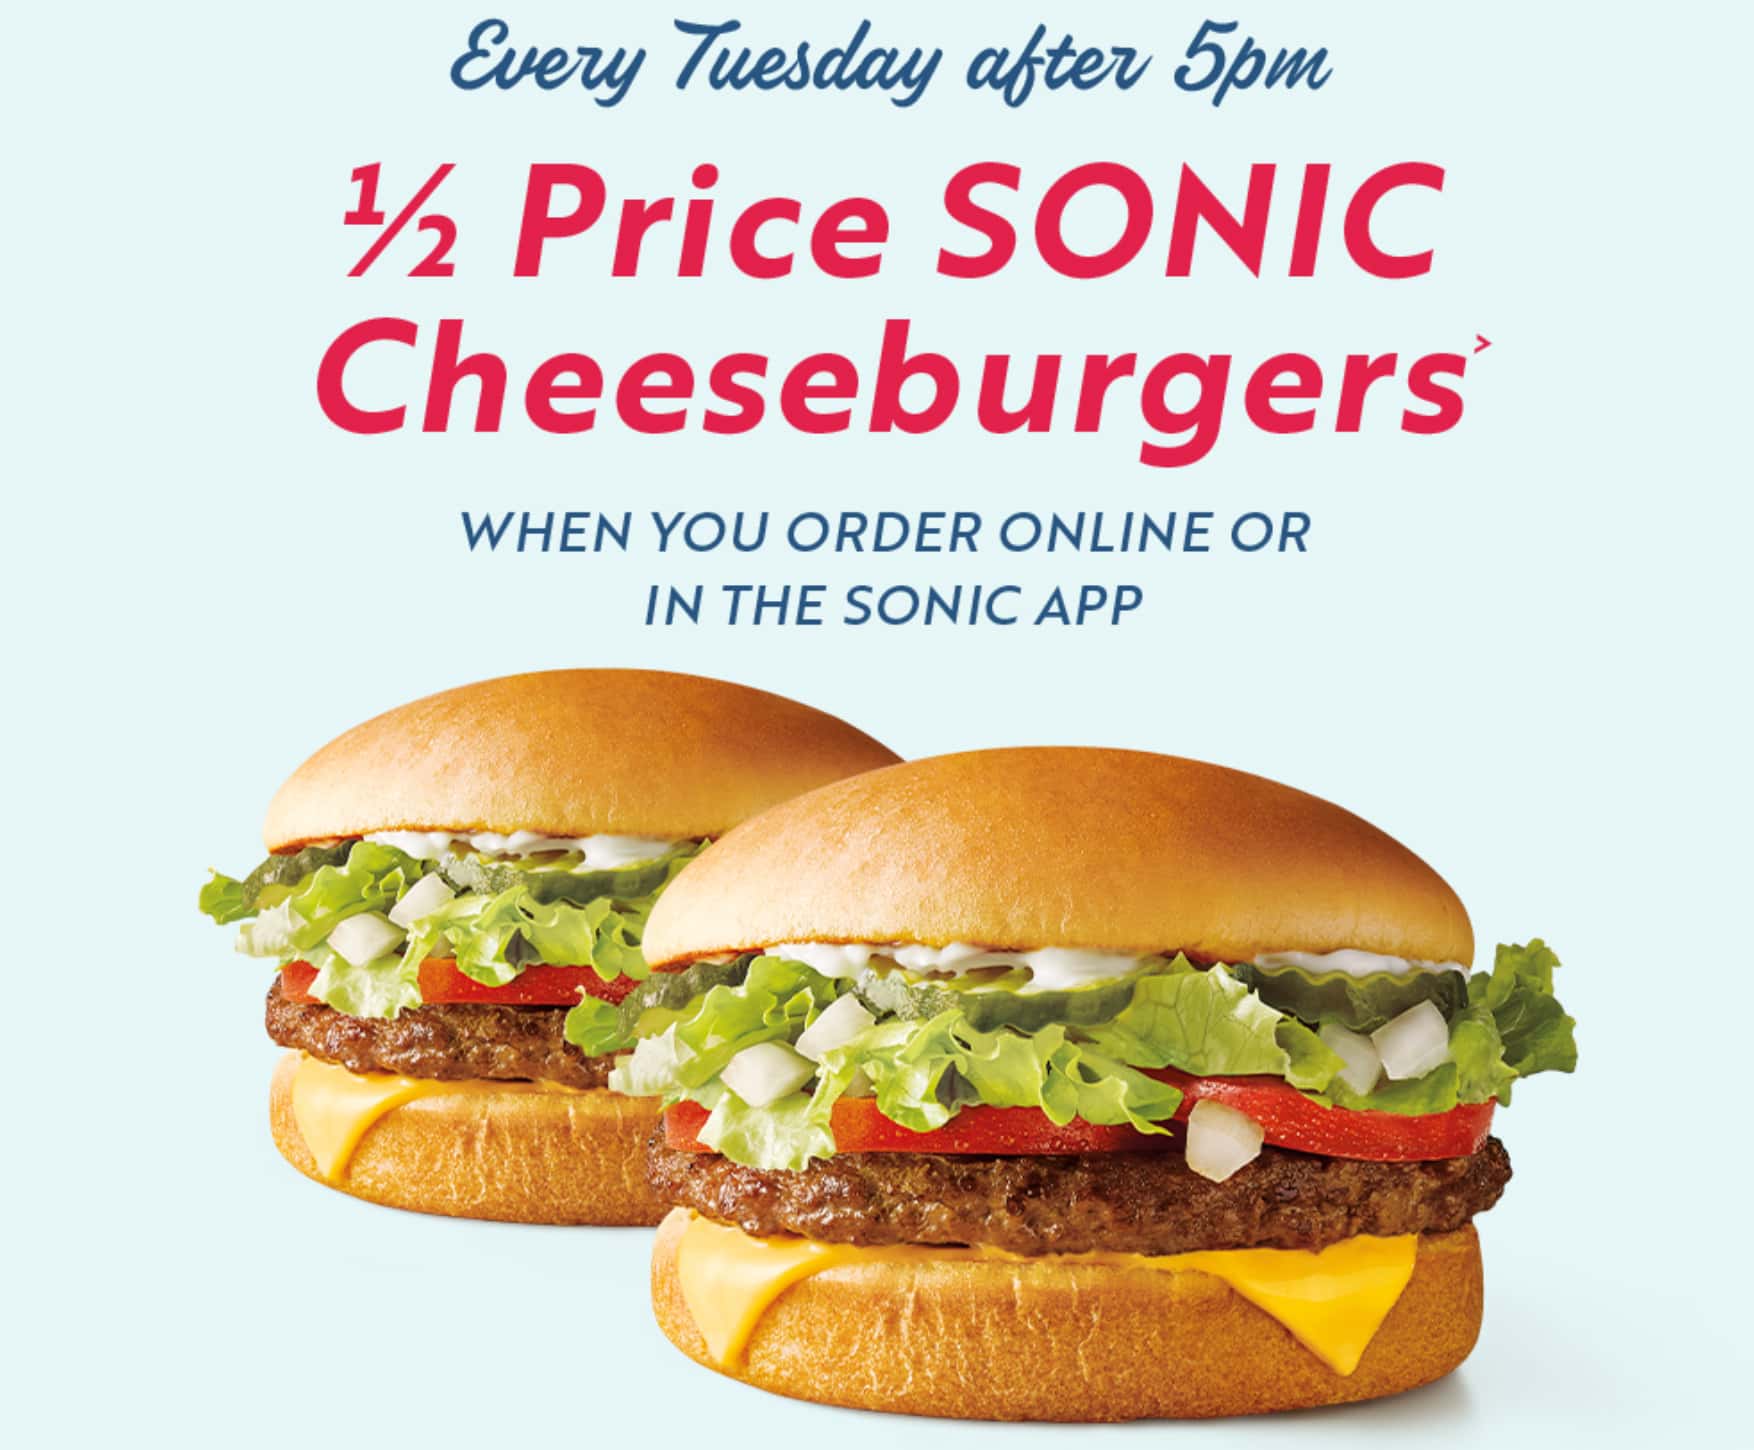 Sonic Half-Priced Cheeseburger deal details